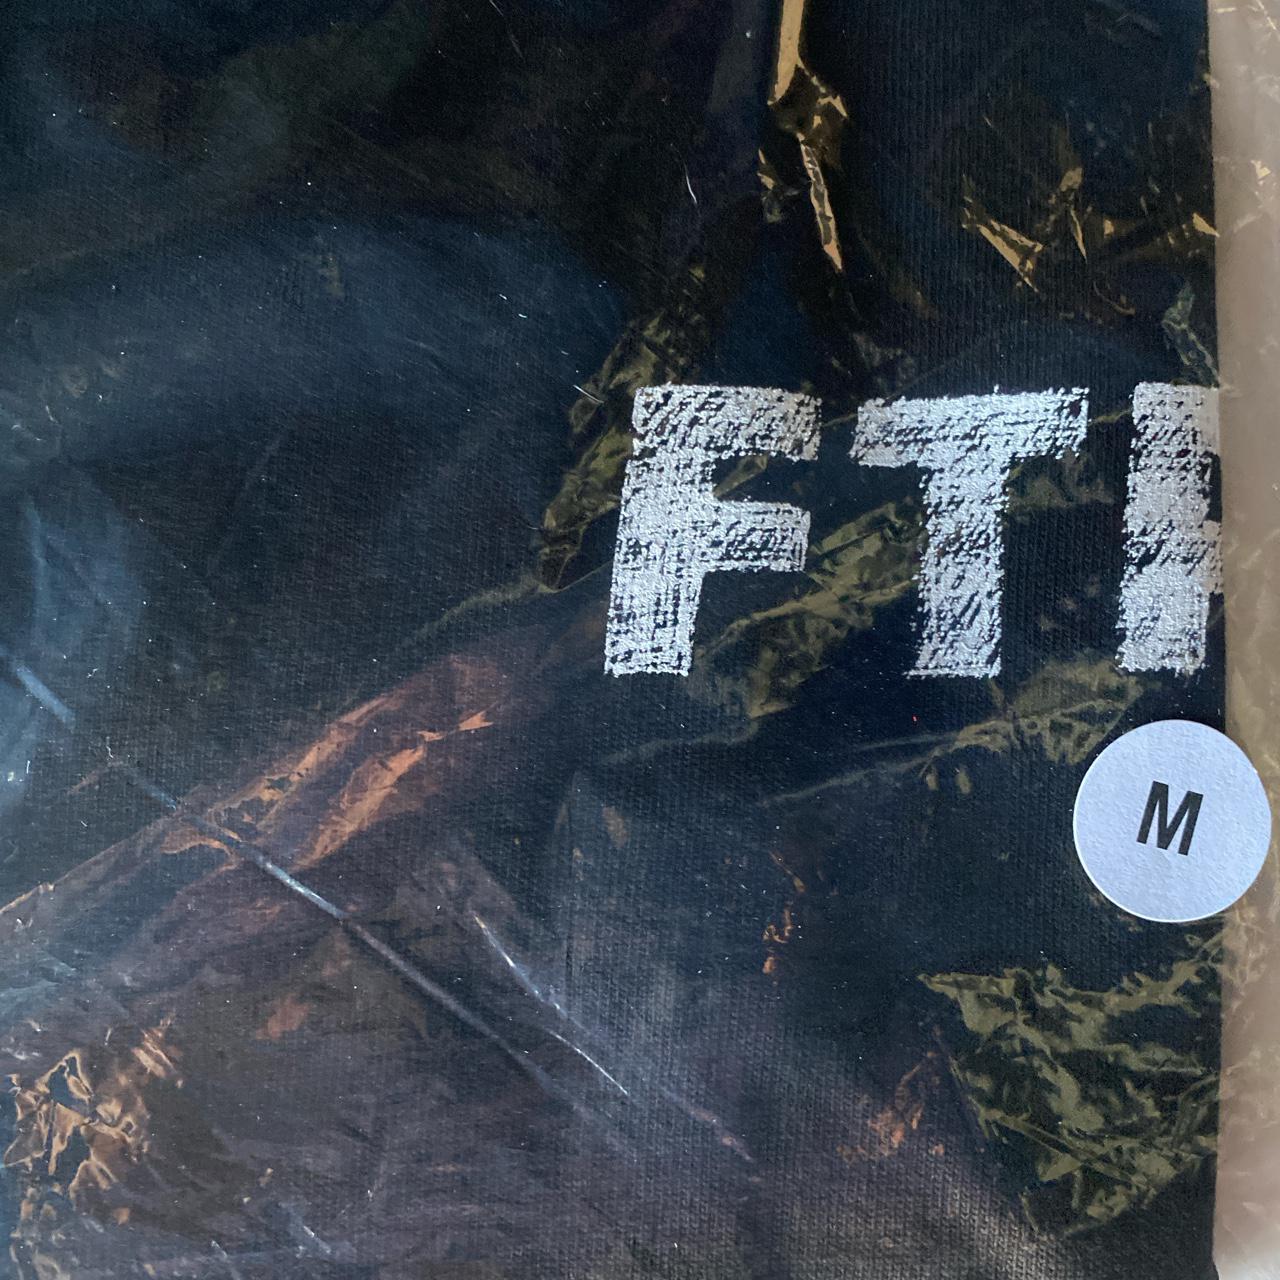 Product Image 2 - #FTP #FUCKTHEPOPULATION

SCRIBBLE LOGO TEE. Size